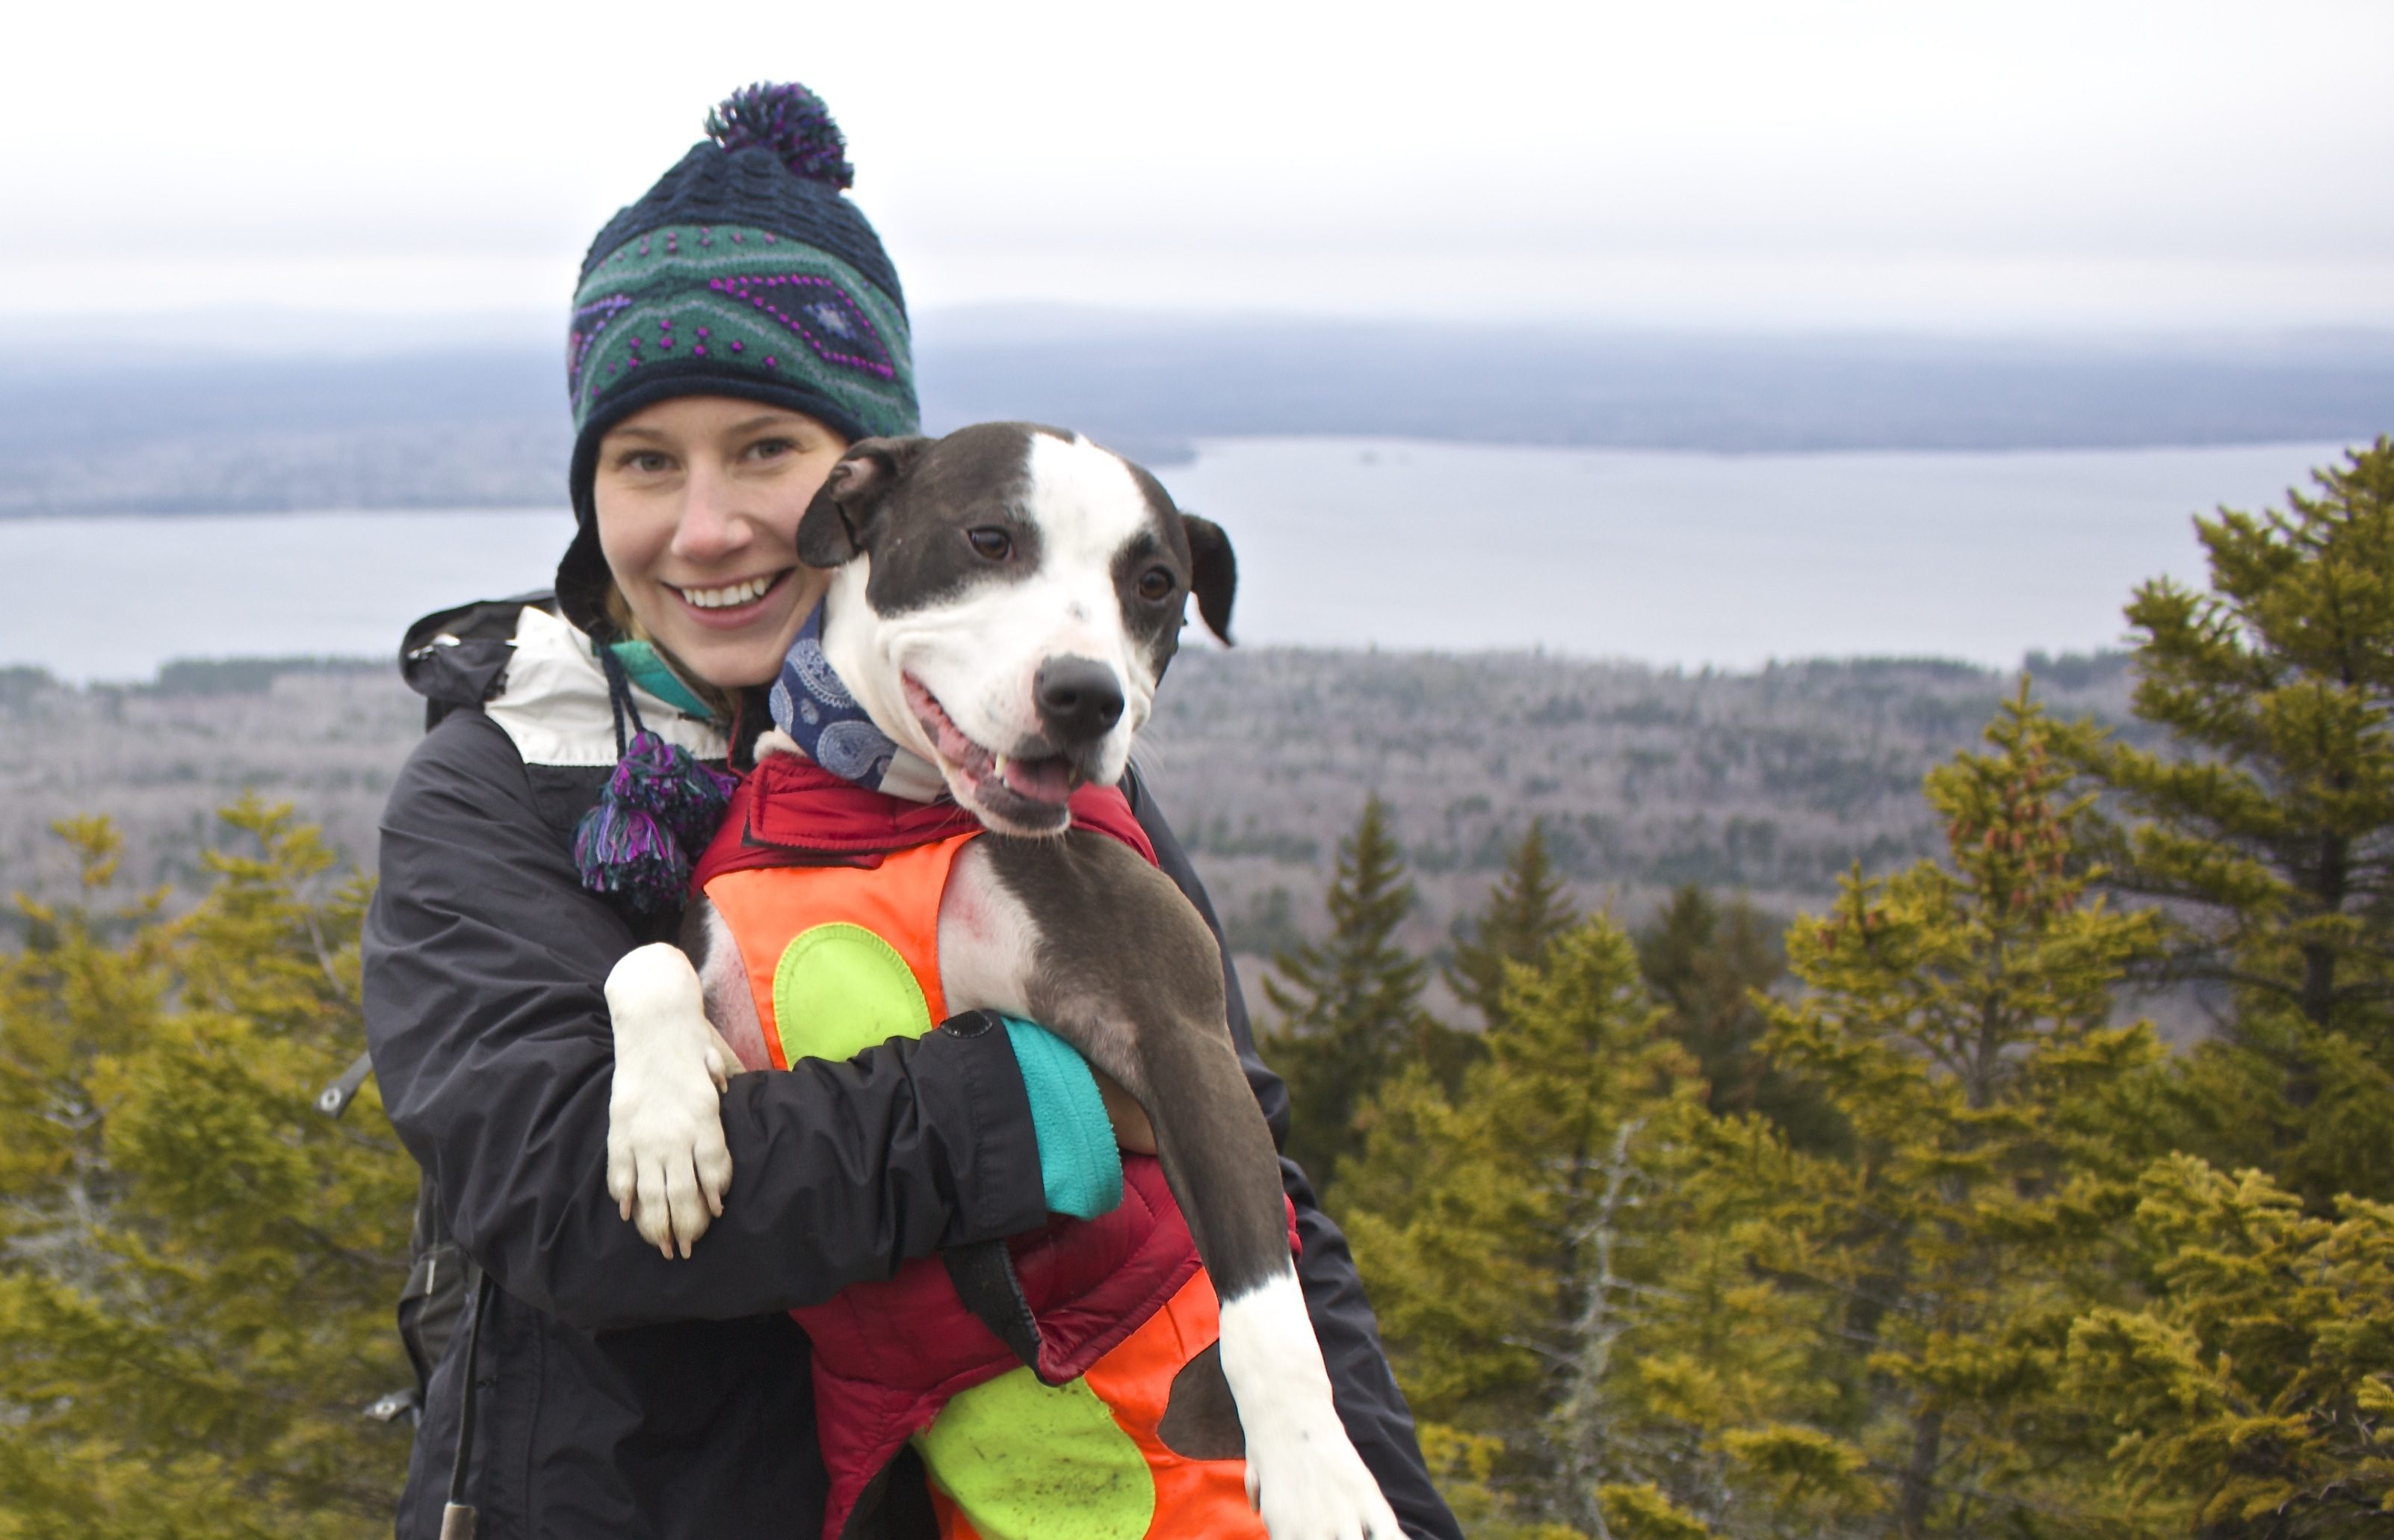 You are currently viewing Maine Adventurer Profile – Aislinn Sarnacki, The One Minute Hike Gal!